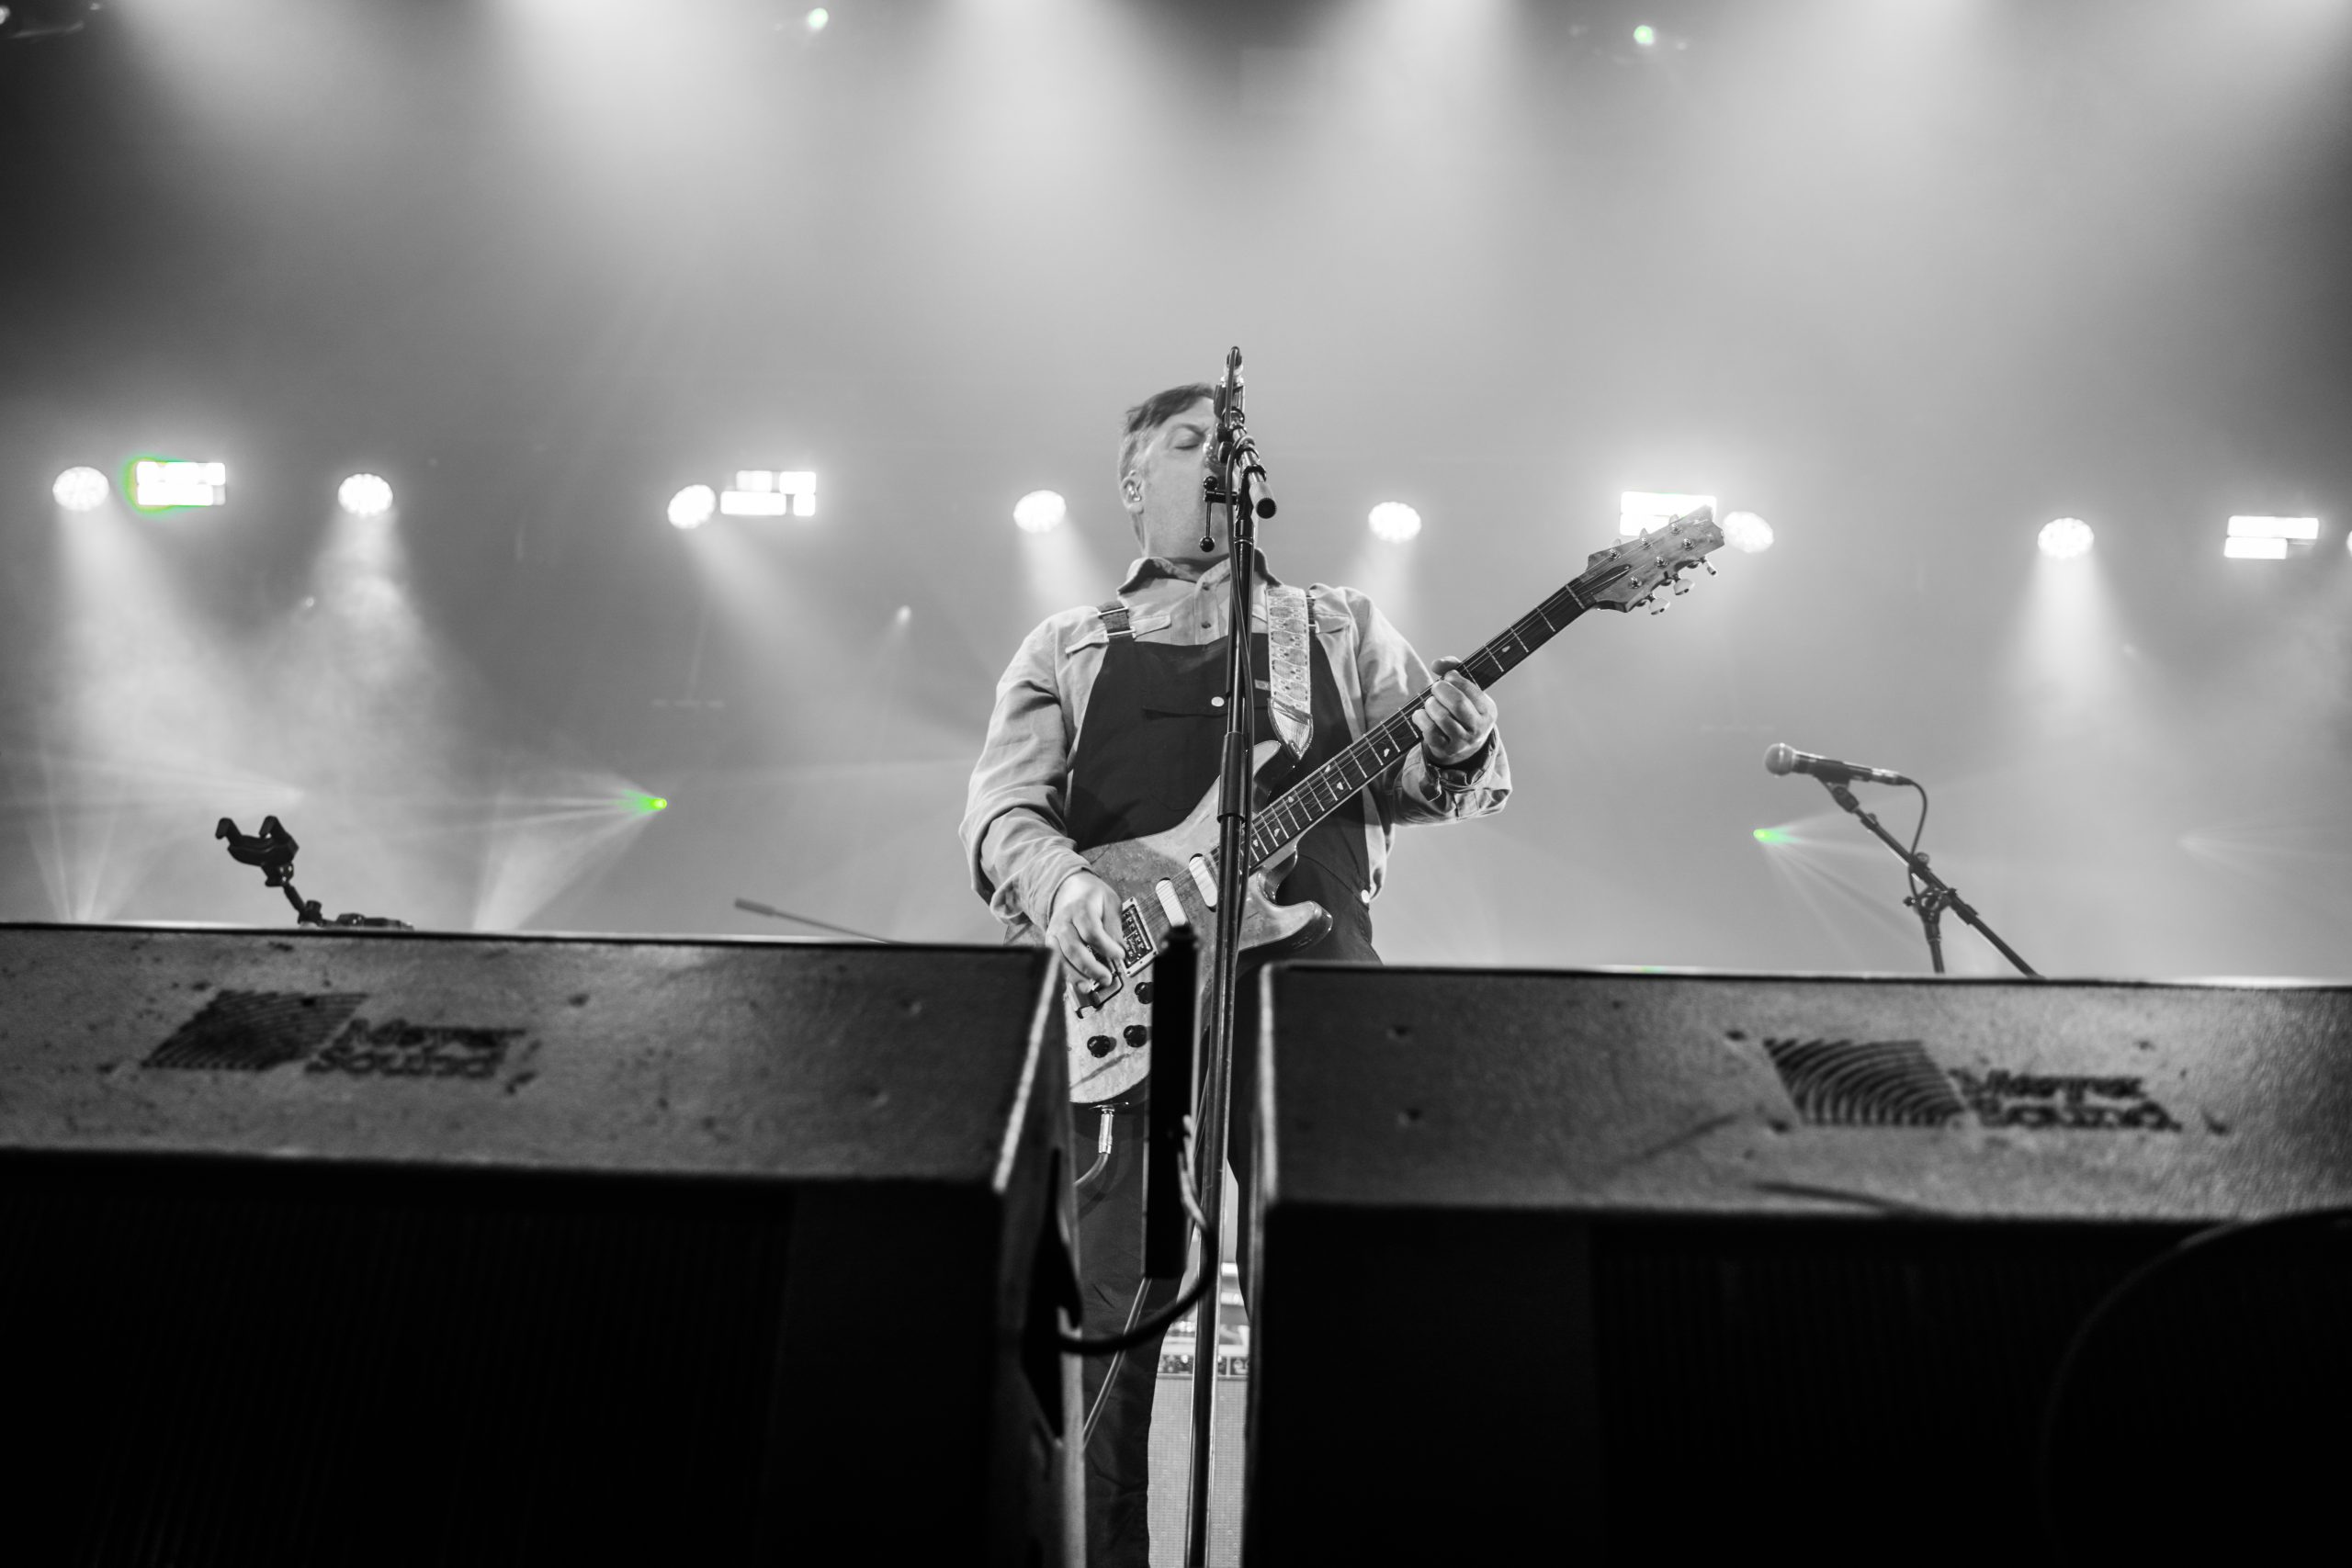 PHOTOS: American Rock Band Modest Mouse Hits The Stage In Toronto